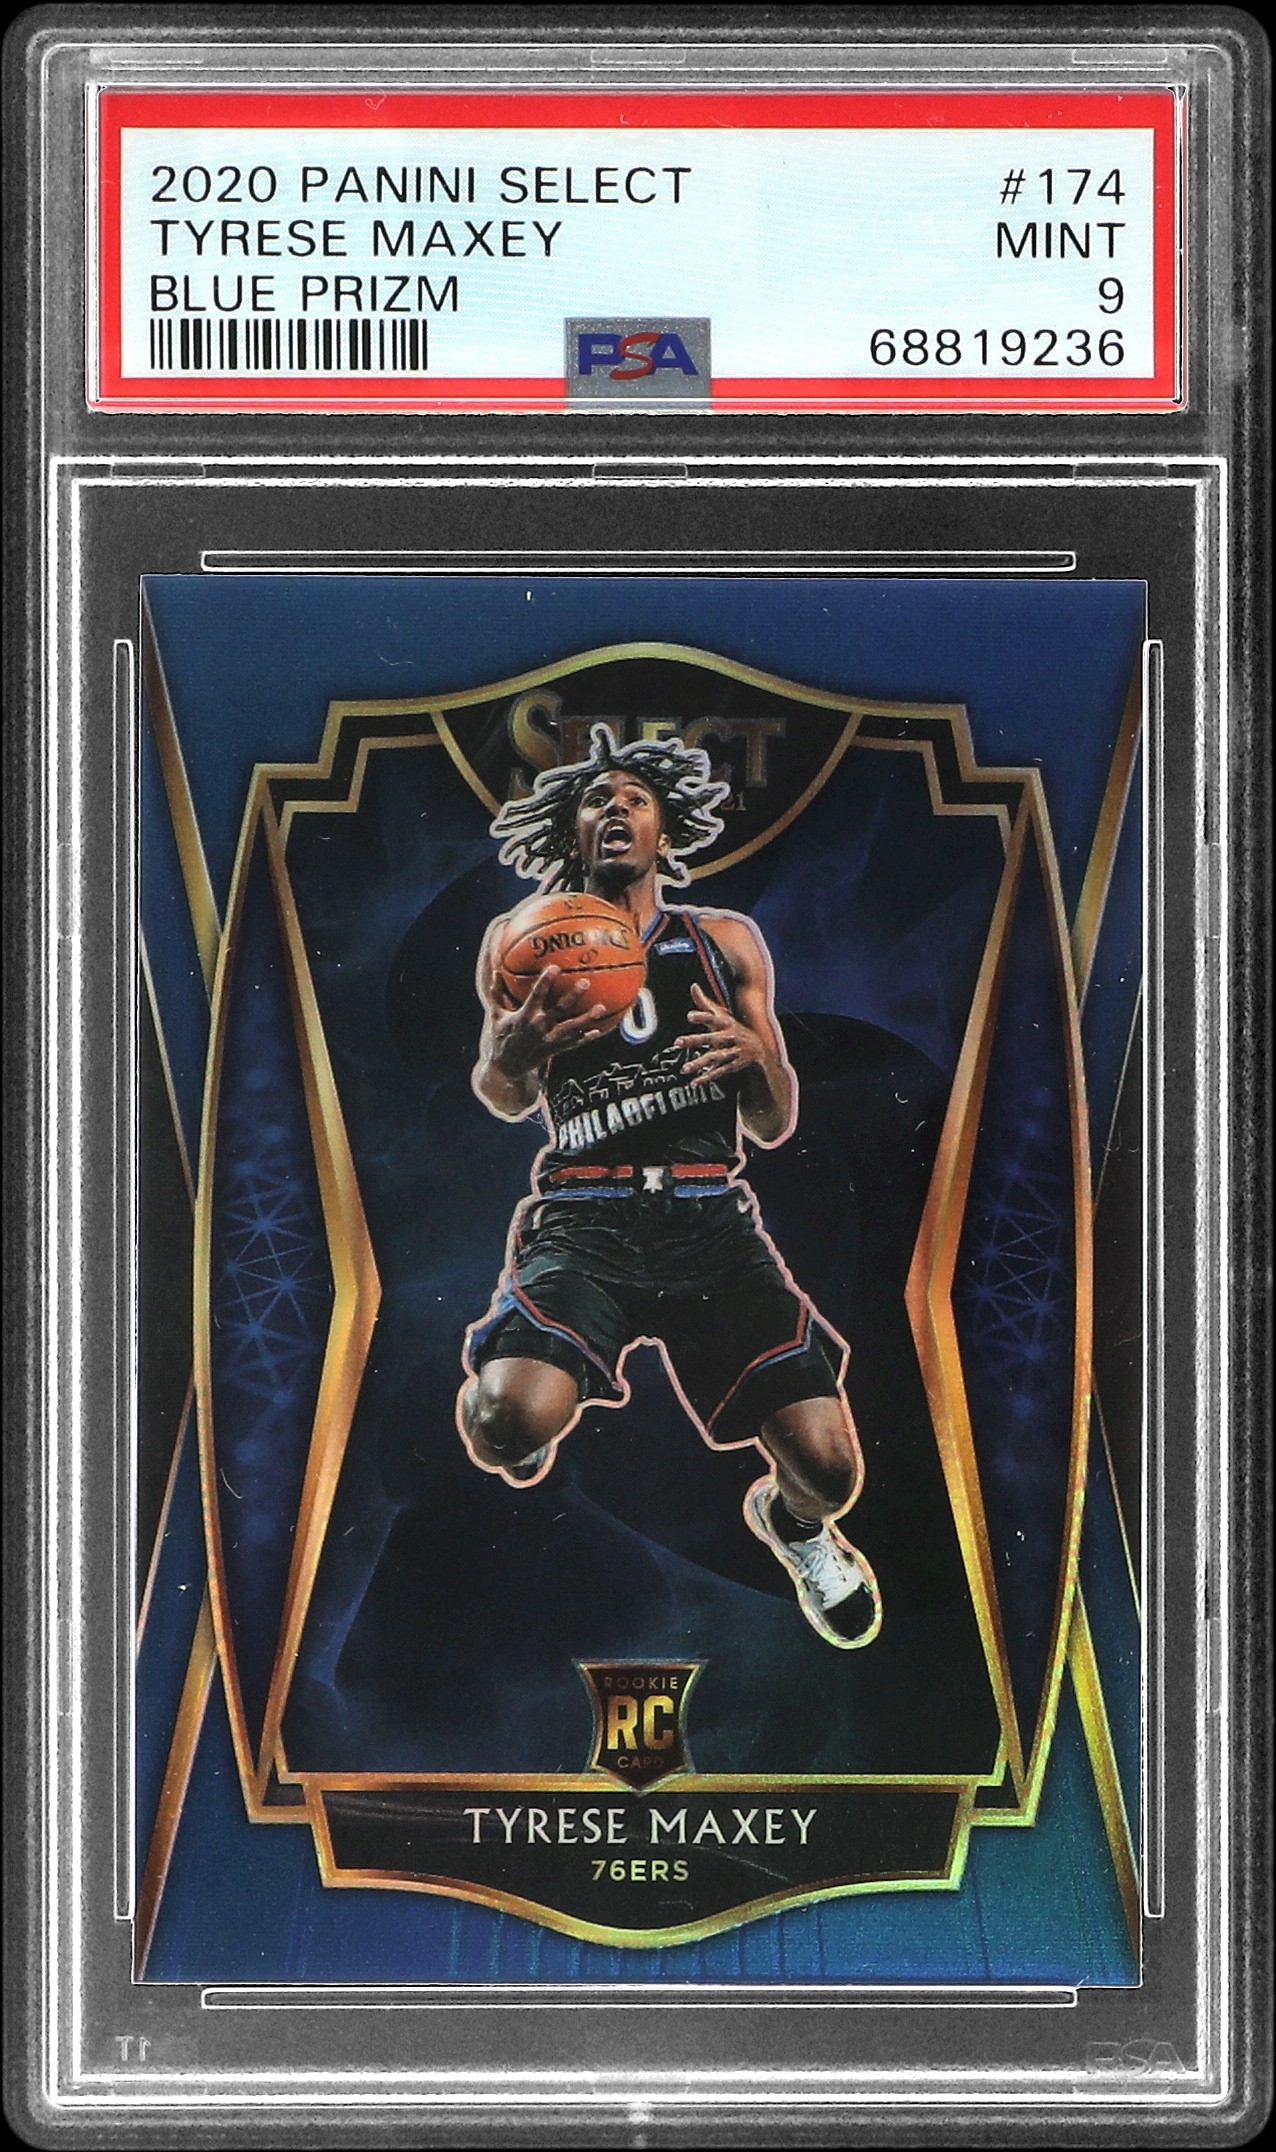 2020 Panini Select Blue Prizm #174 Tyrese Maxey Rookie Card – PSA MINT 9